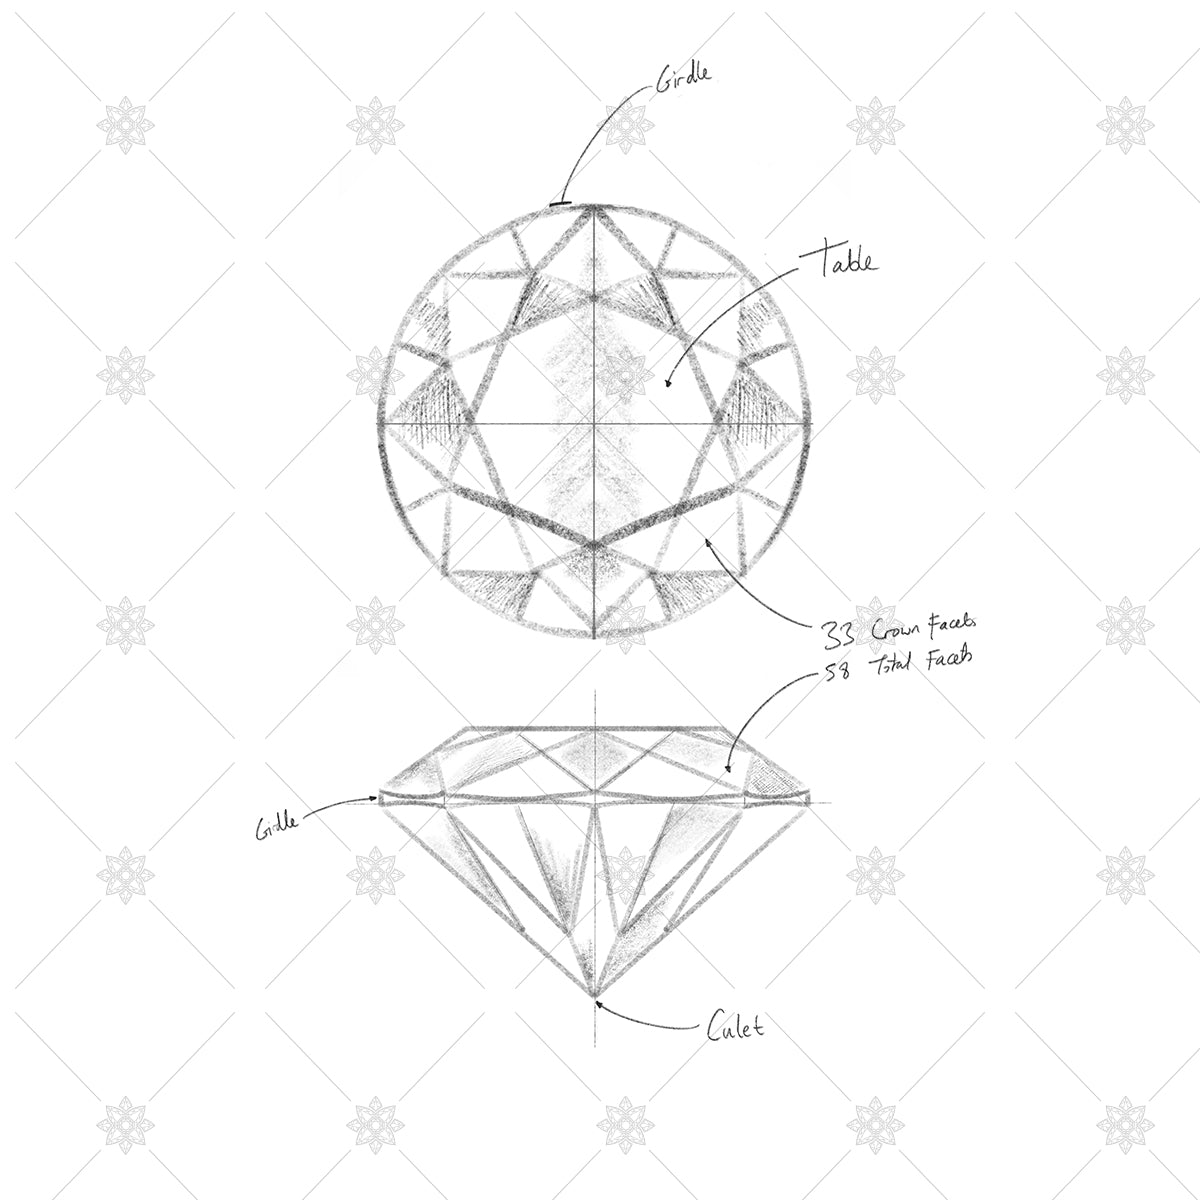 Round brilliant cut diamond sketch with annotations